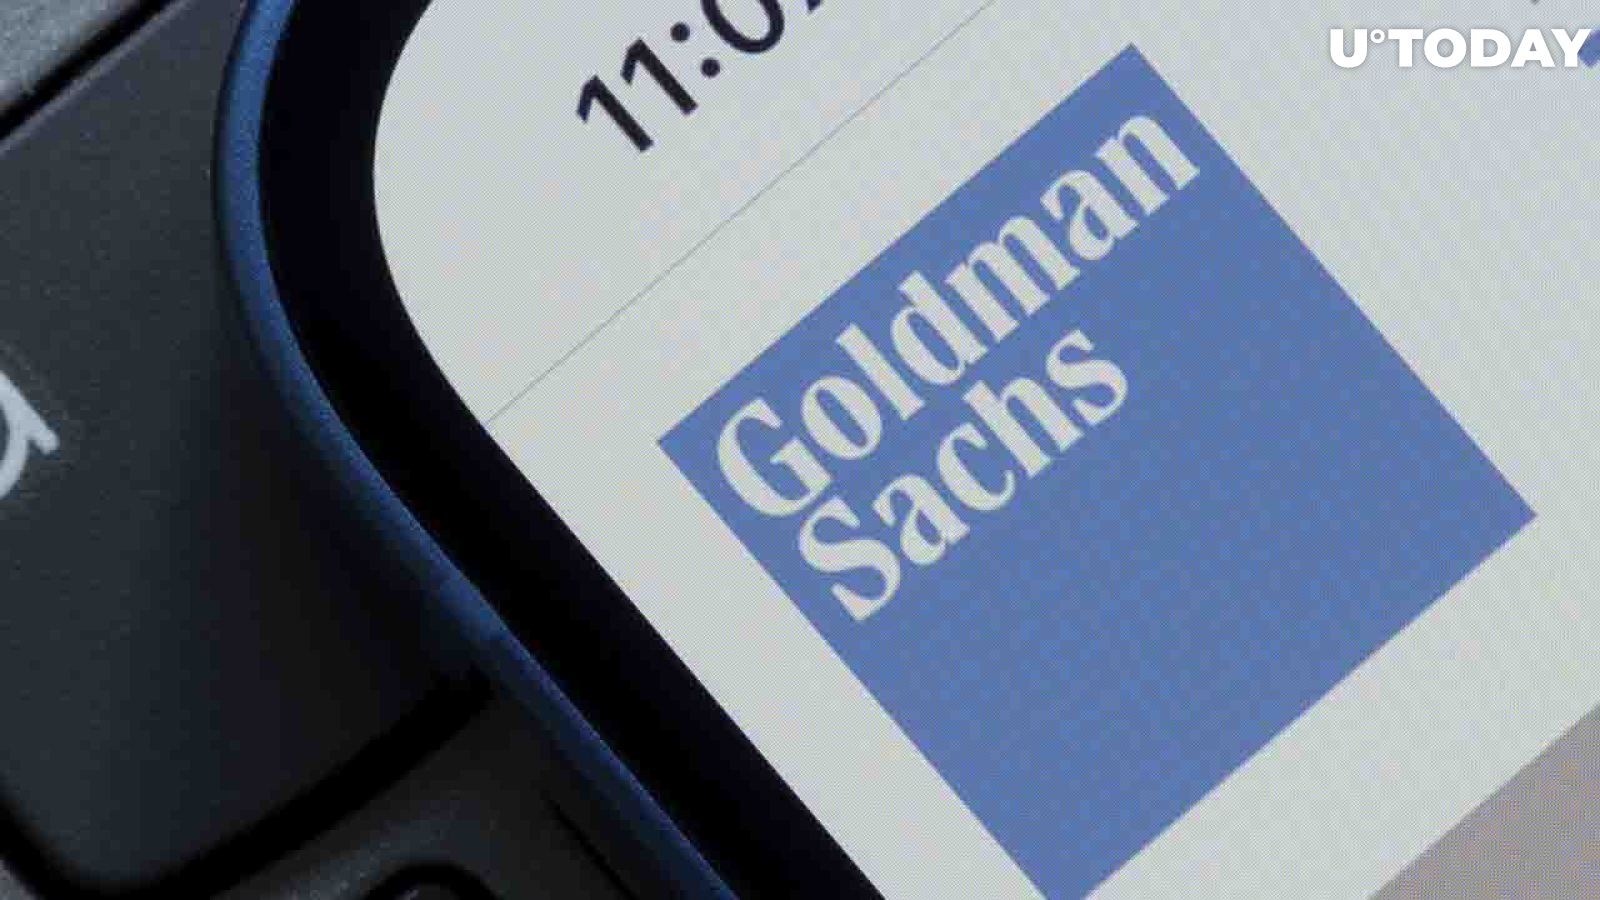 Goldman Sachs Makes Its First Over-the-Counter Crypto Transaction, Here's What It Means